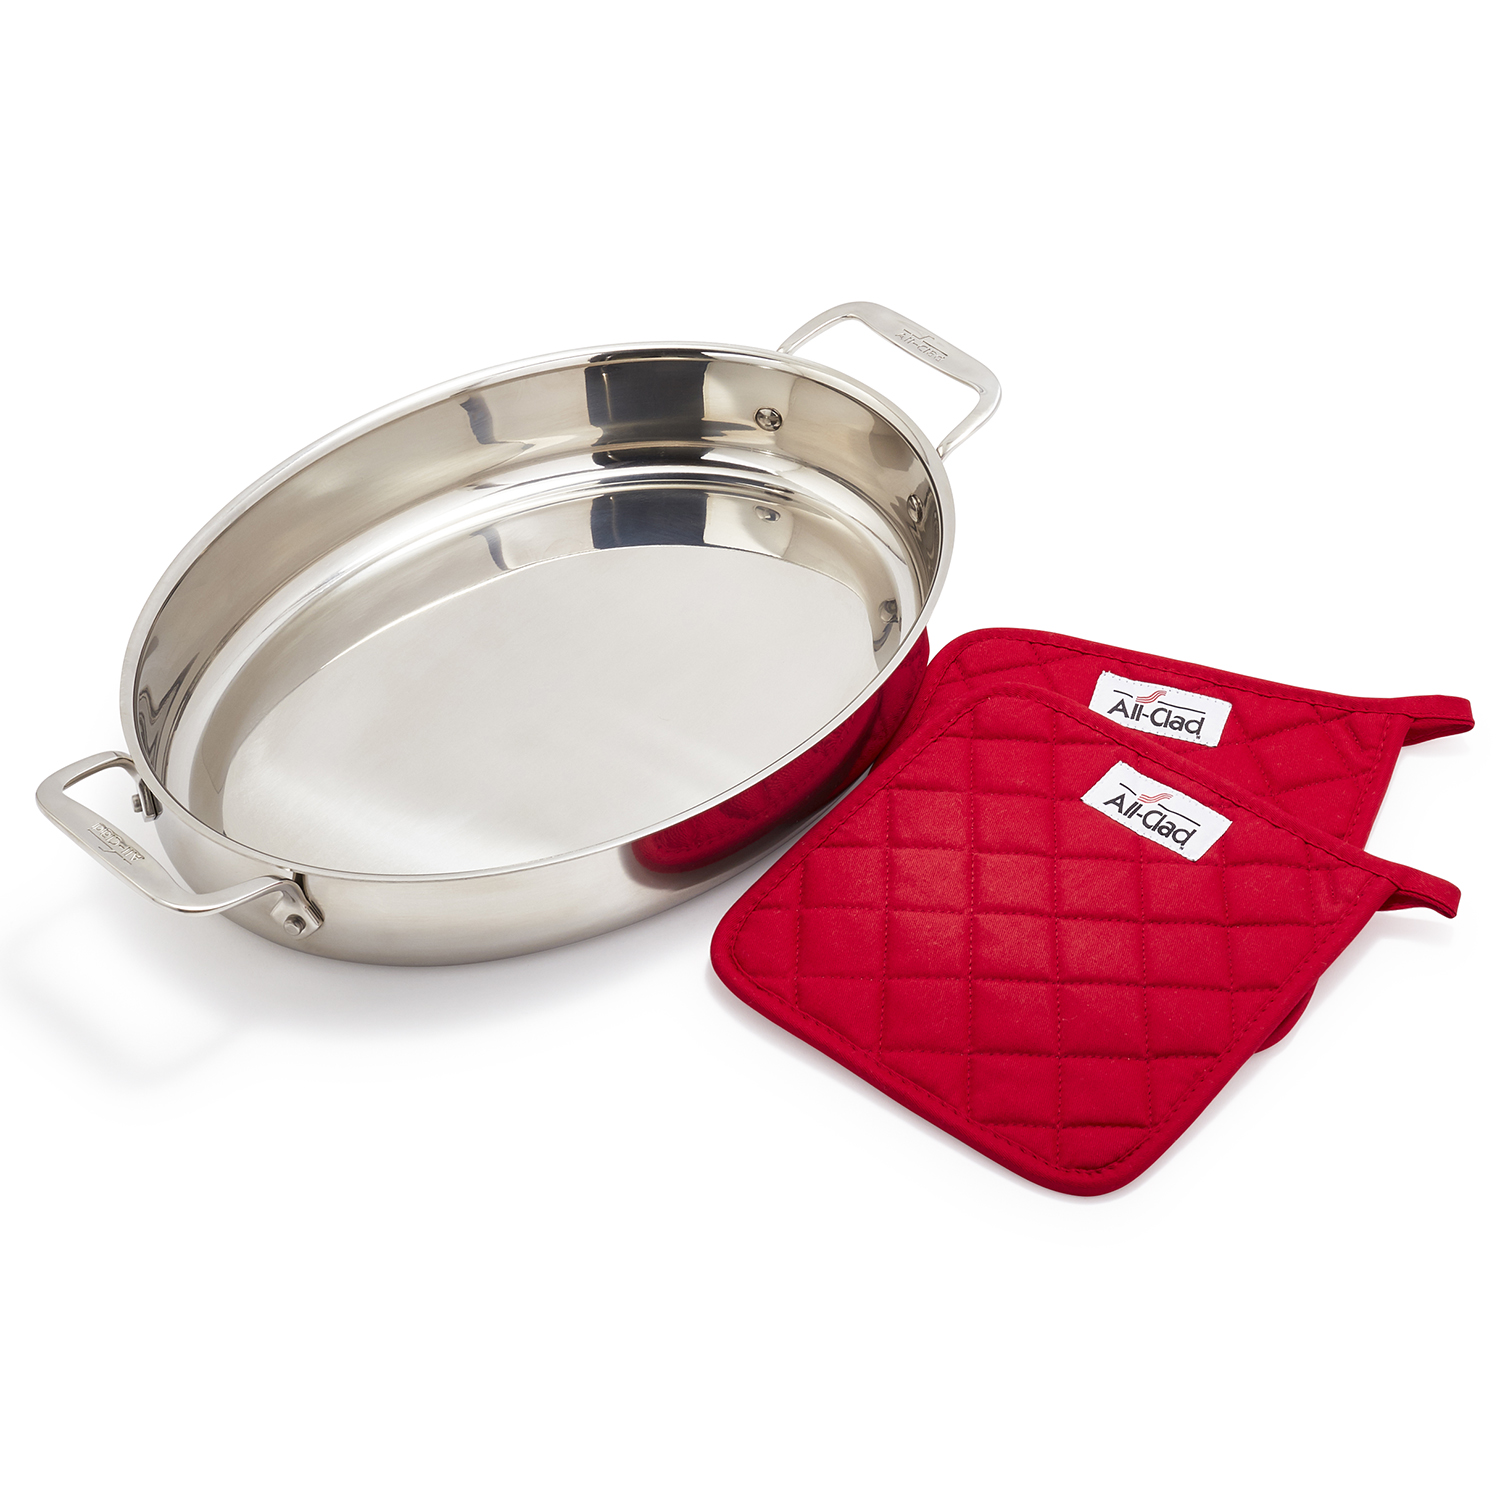 All-Clad D3 Stainless Steel Oval Roaster with Pot Holders | Sur La Table